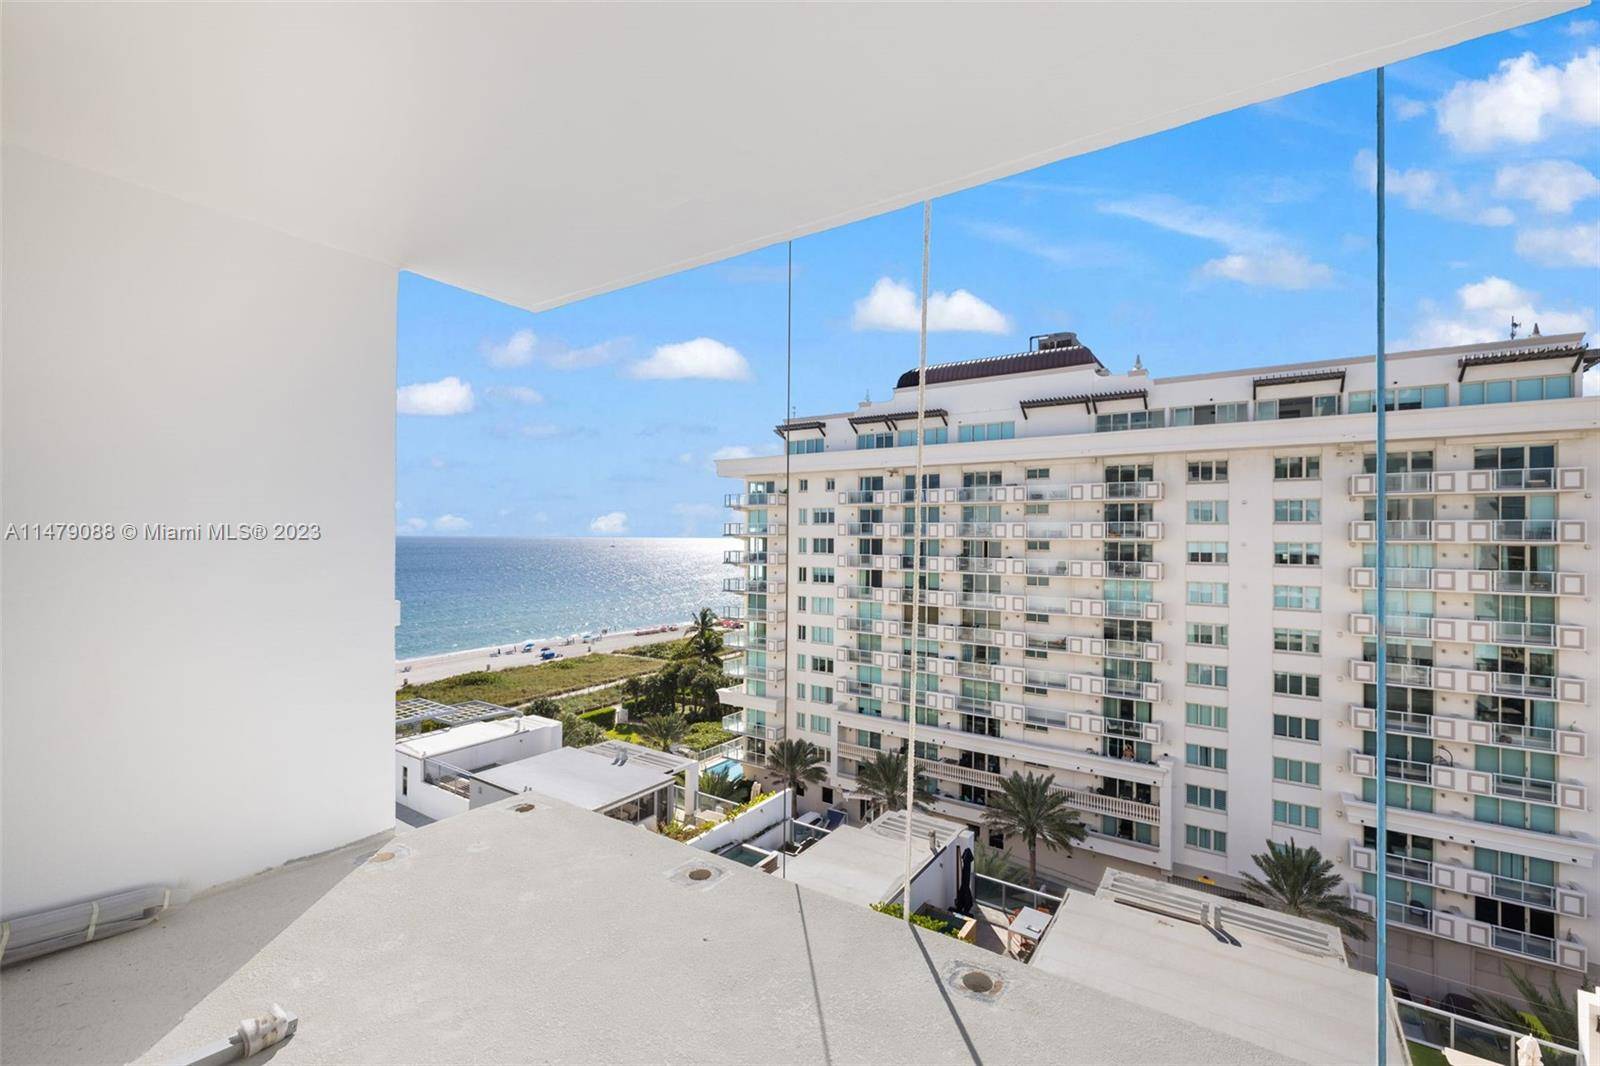 Residence 1007 in Surfside Towers is centrally located in the heart of Surfside on the ocean.